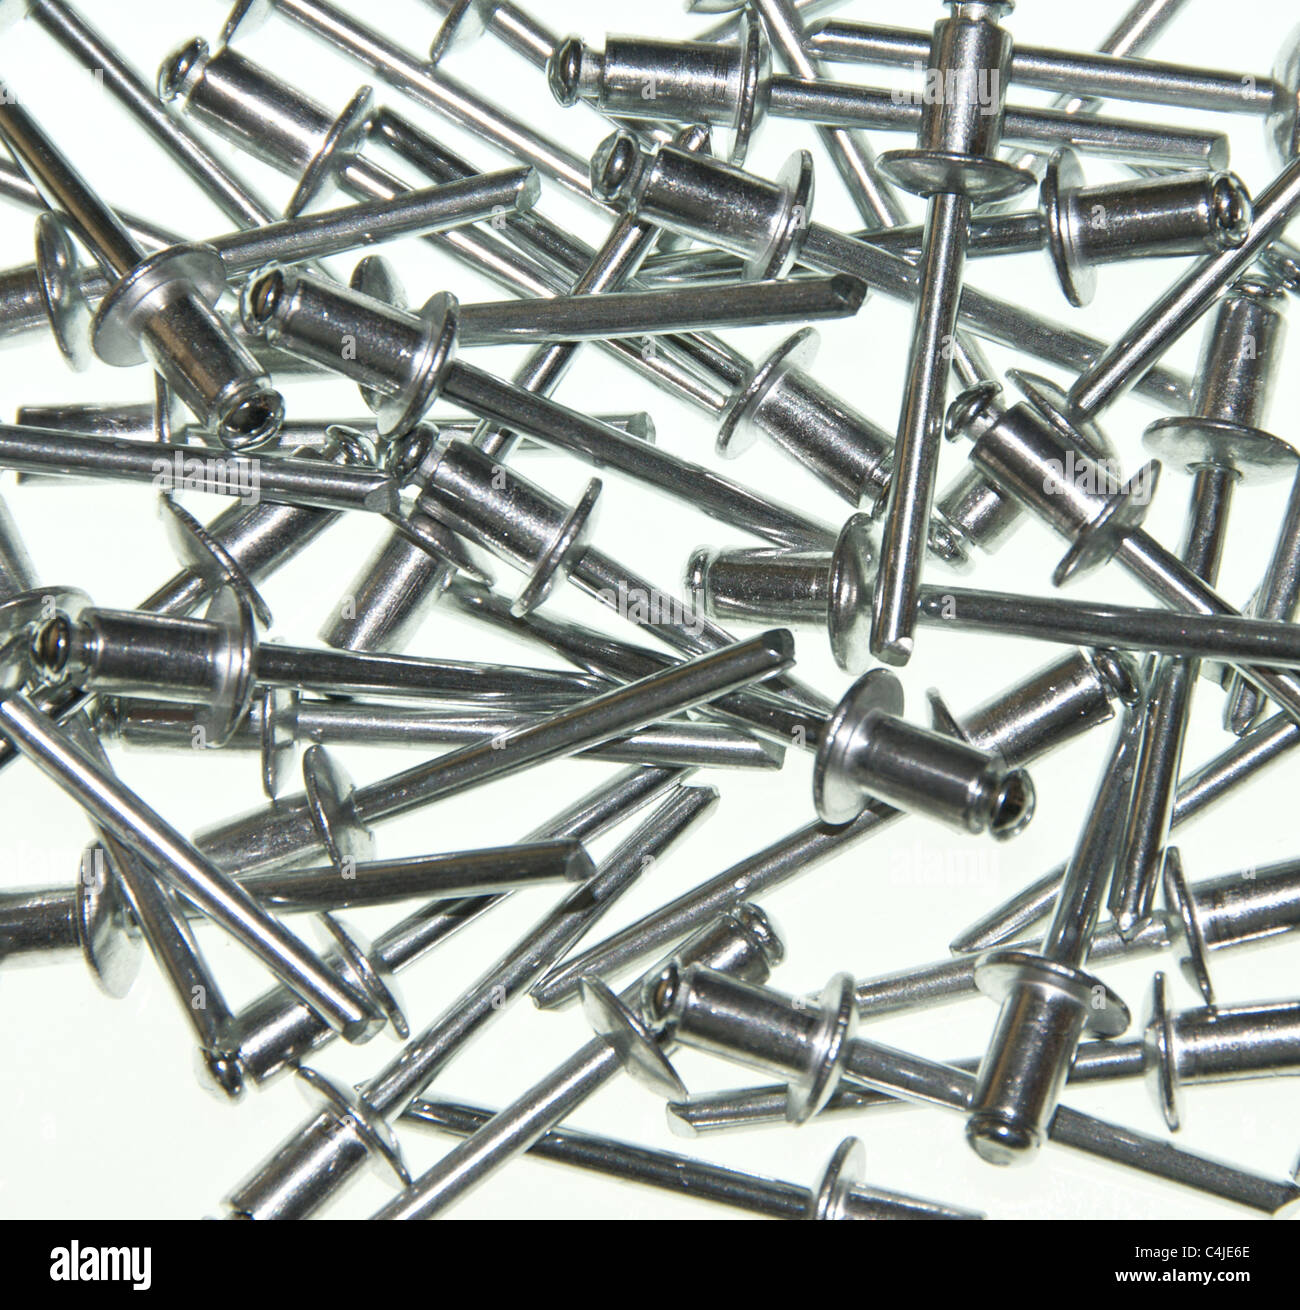 Pop rivets for metal fabrication Stock Photo